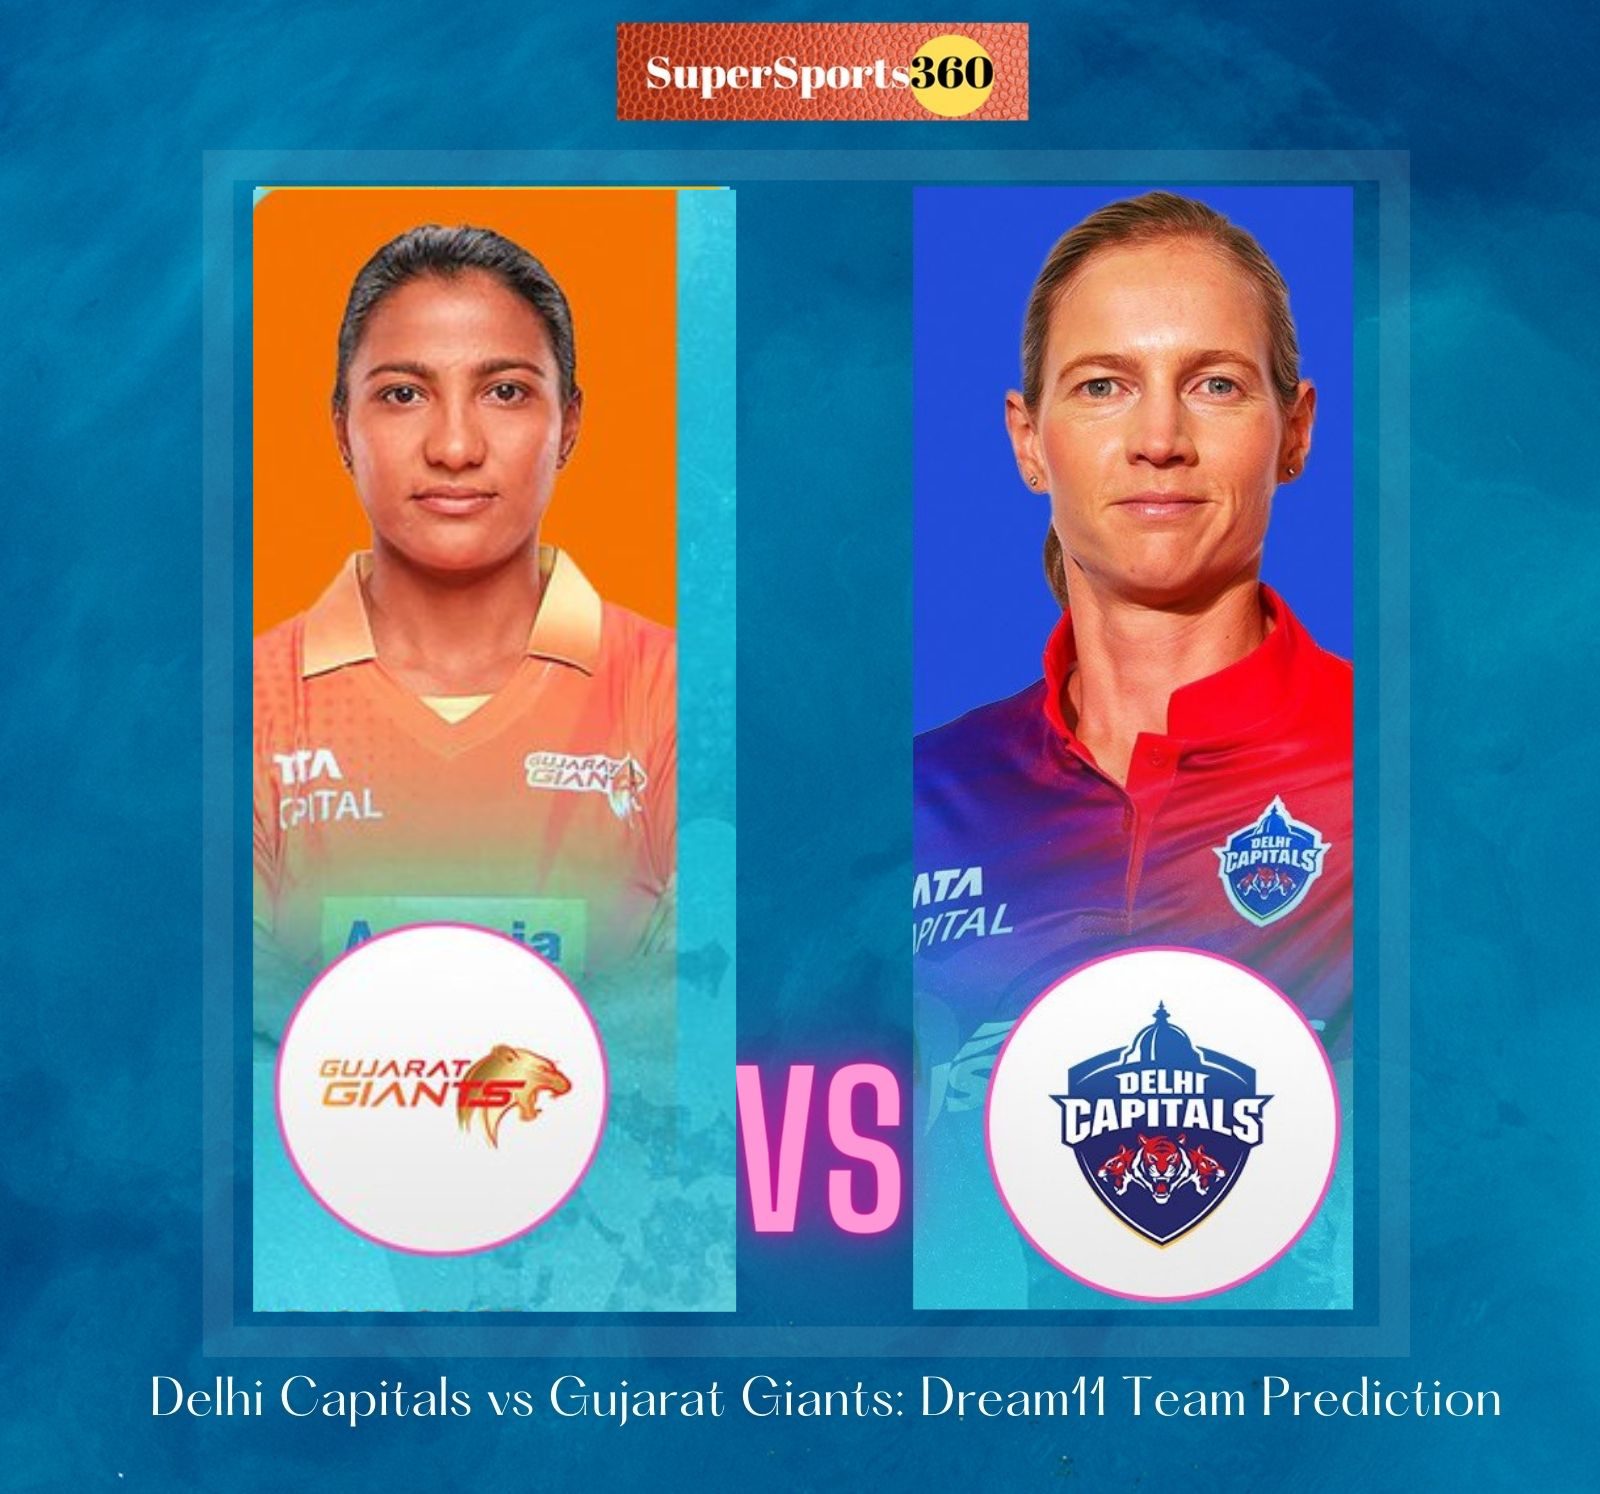 Joy partners with Delhi capitals, onboards cricketers to fuel growth